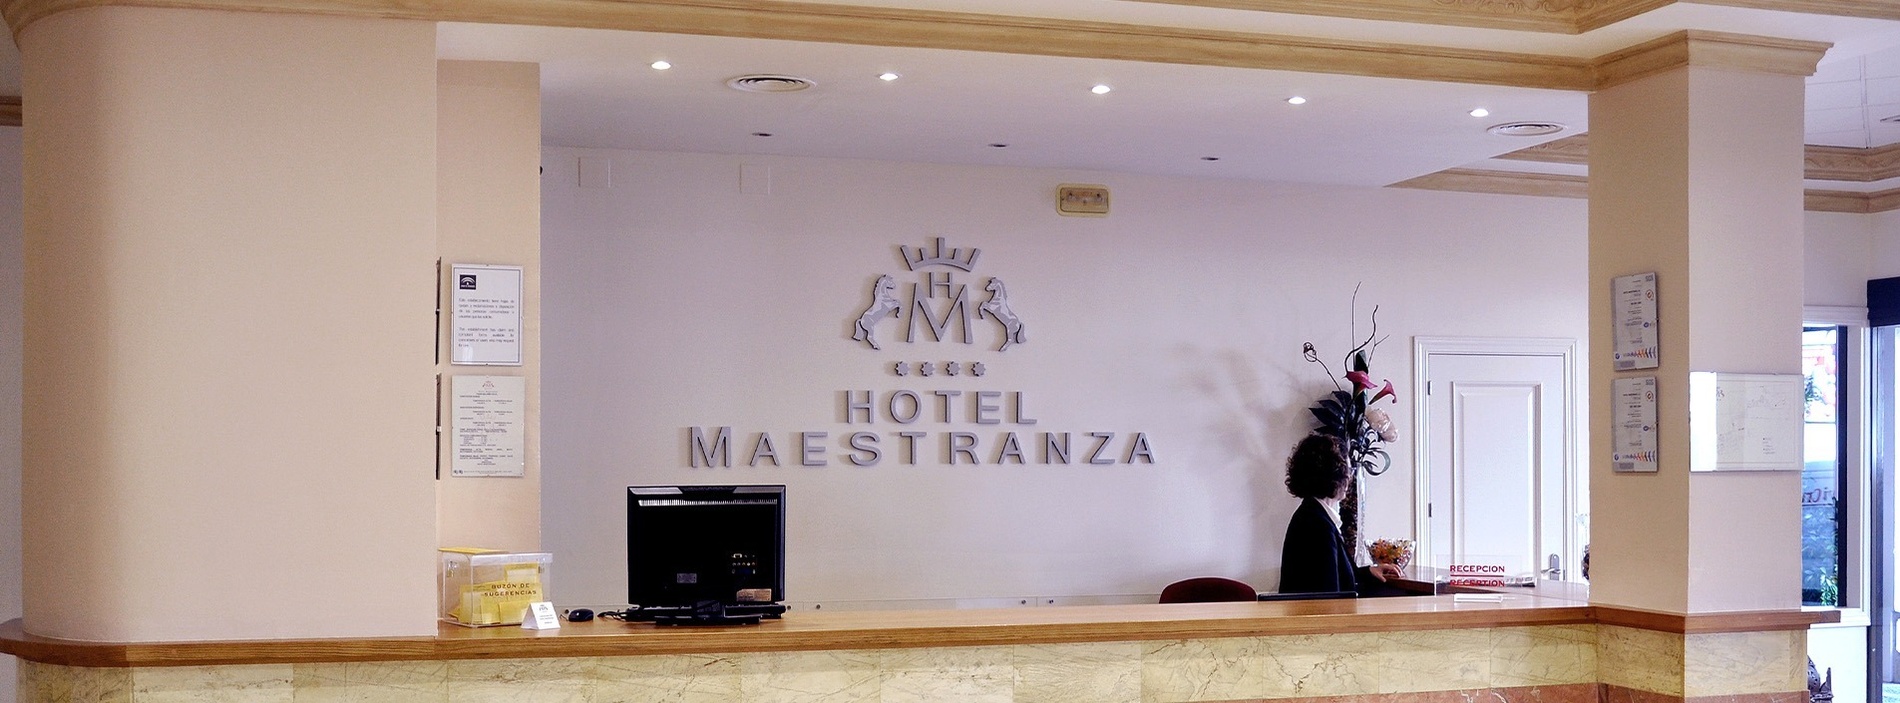 the front desk of hotel maestranza has a computer on it